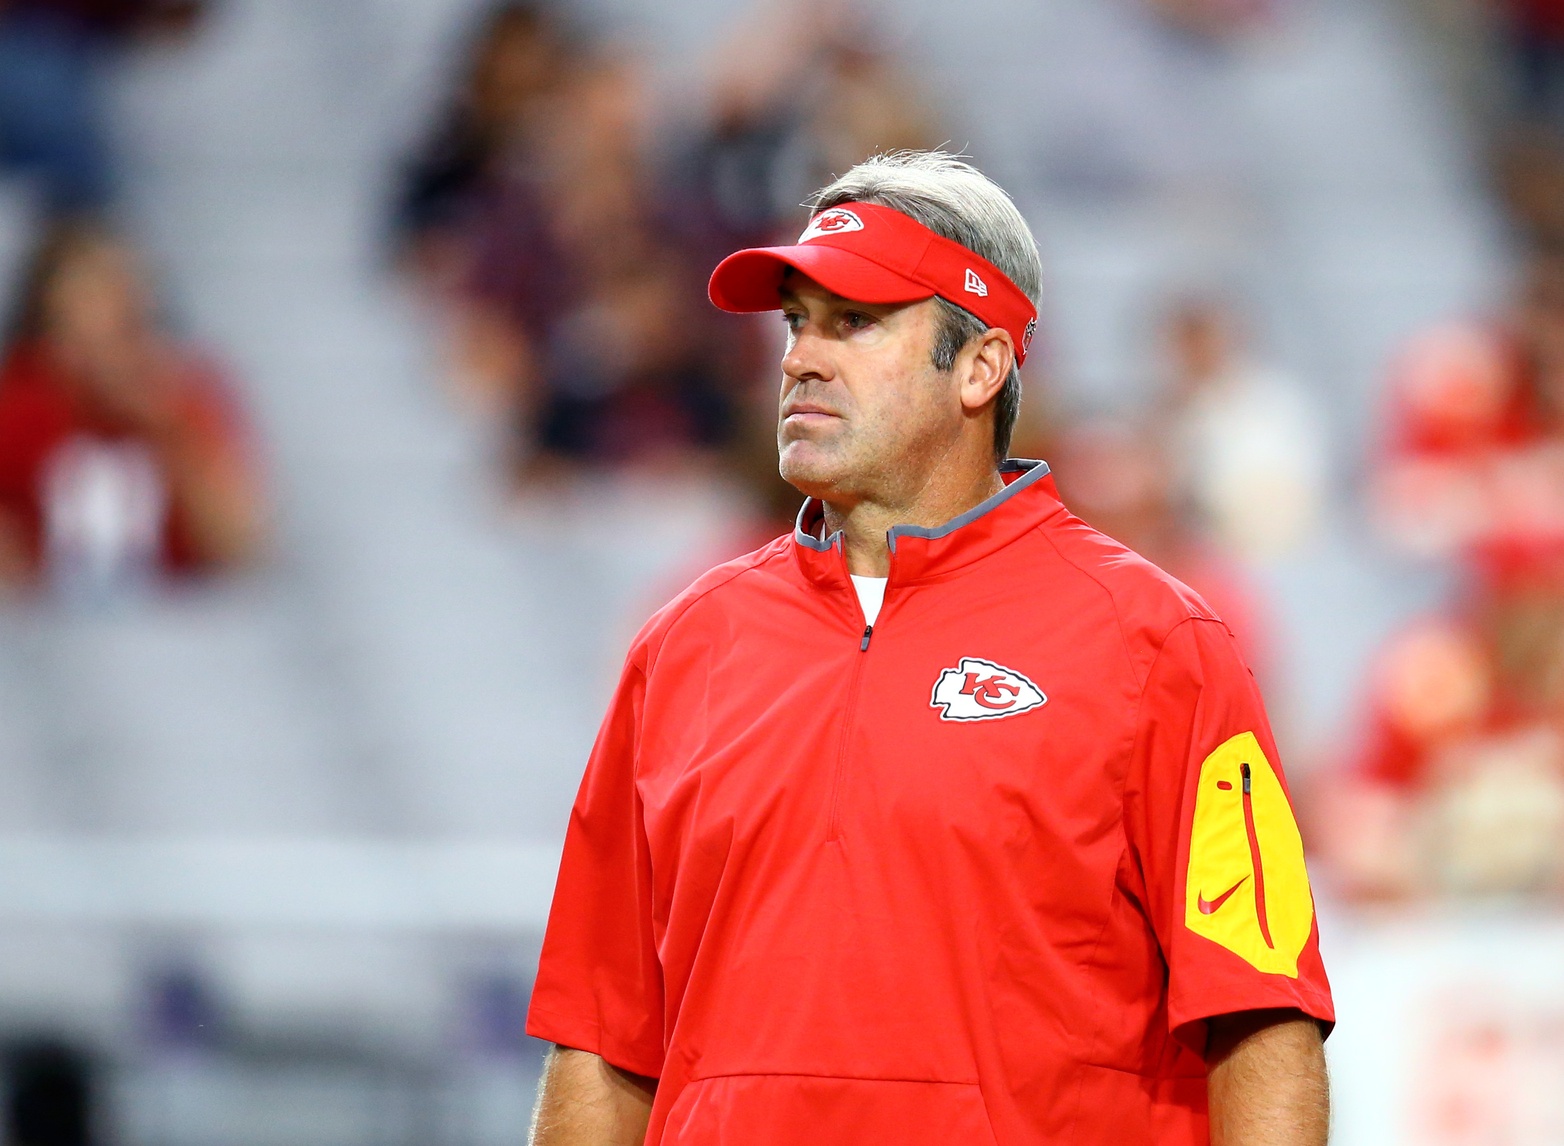 UPDATE: Doug Pederson Has Emerged(?) as a Top Candidate for Eagles Head Coaching Position